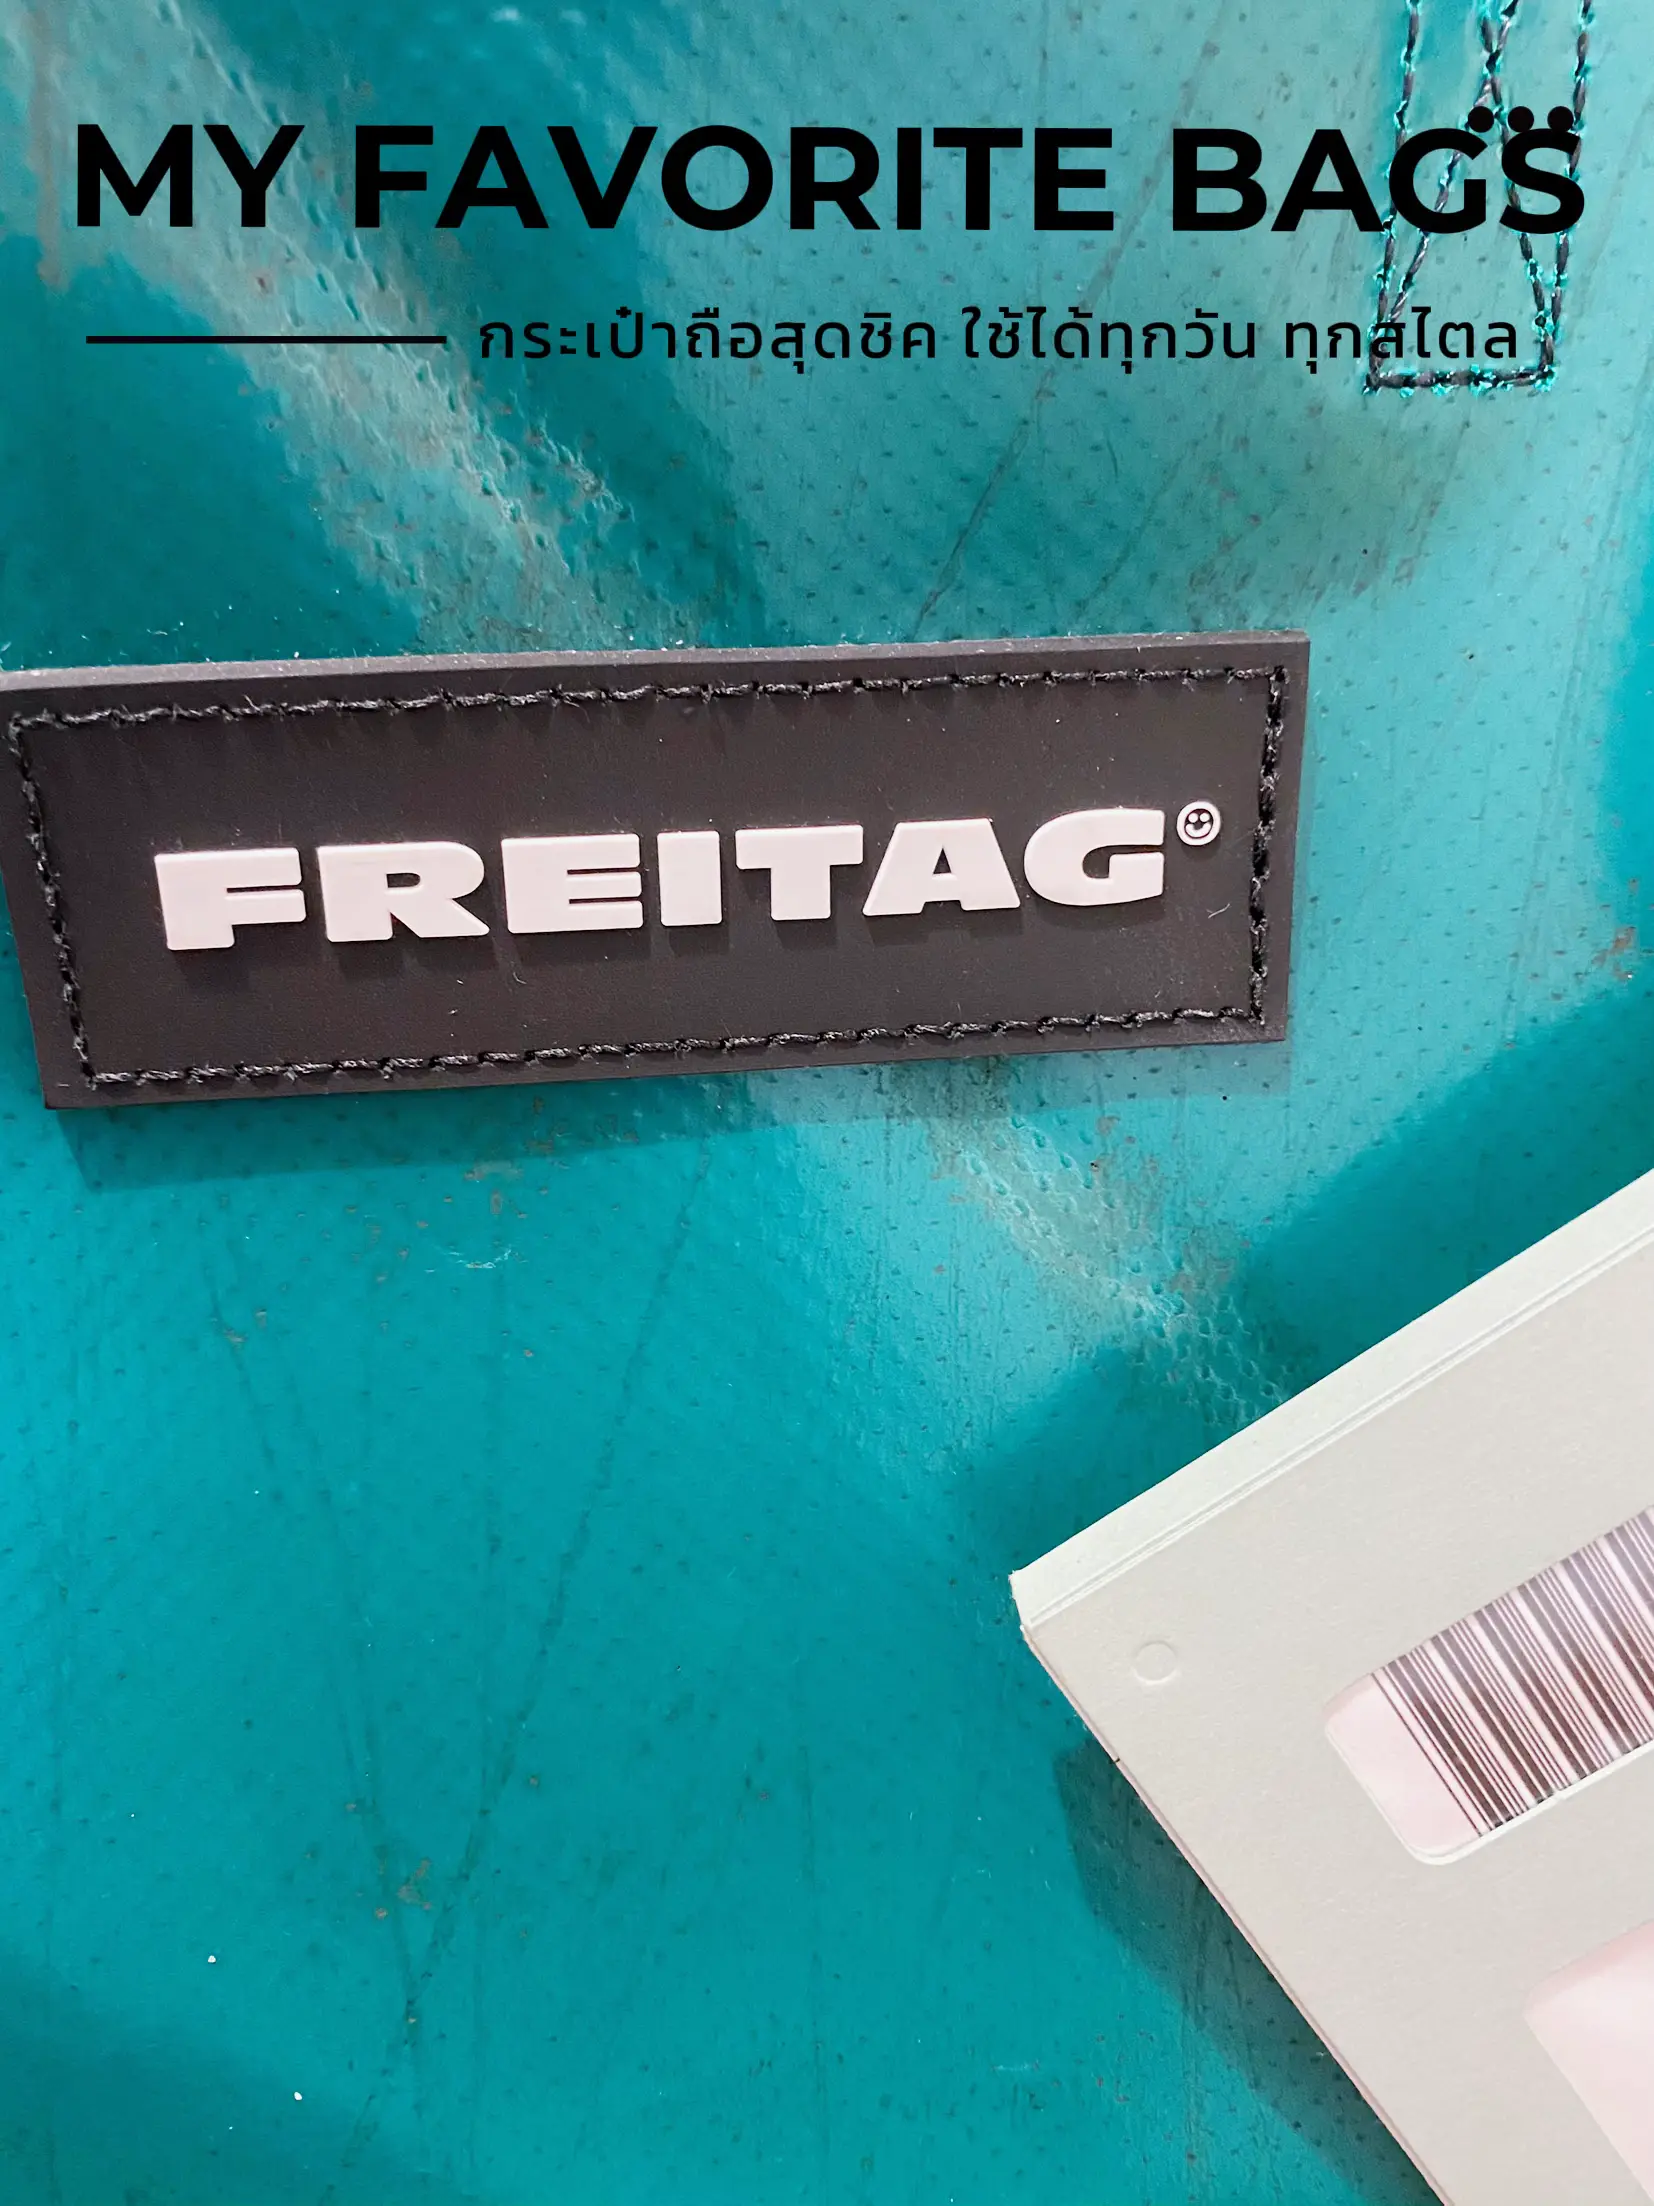 FREITAG MIAMI VICE BAG VIEW | Gallery posted by noeychita | Lemon8